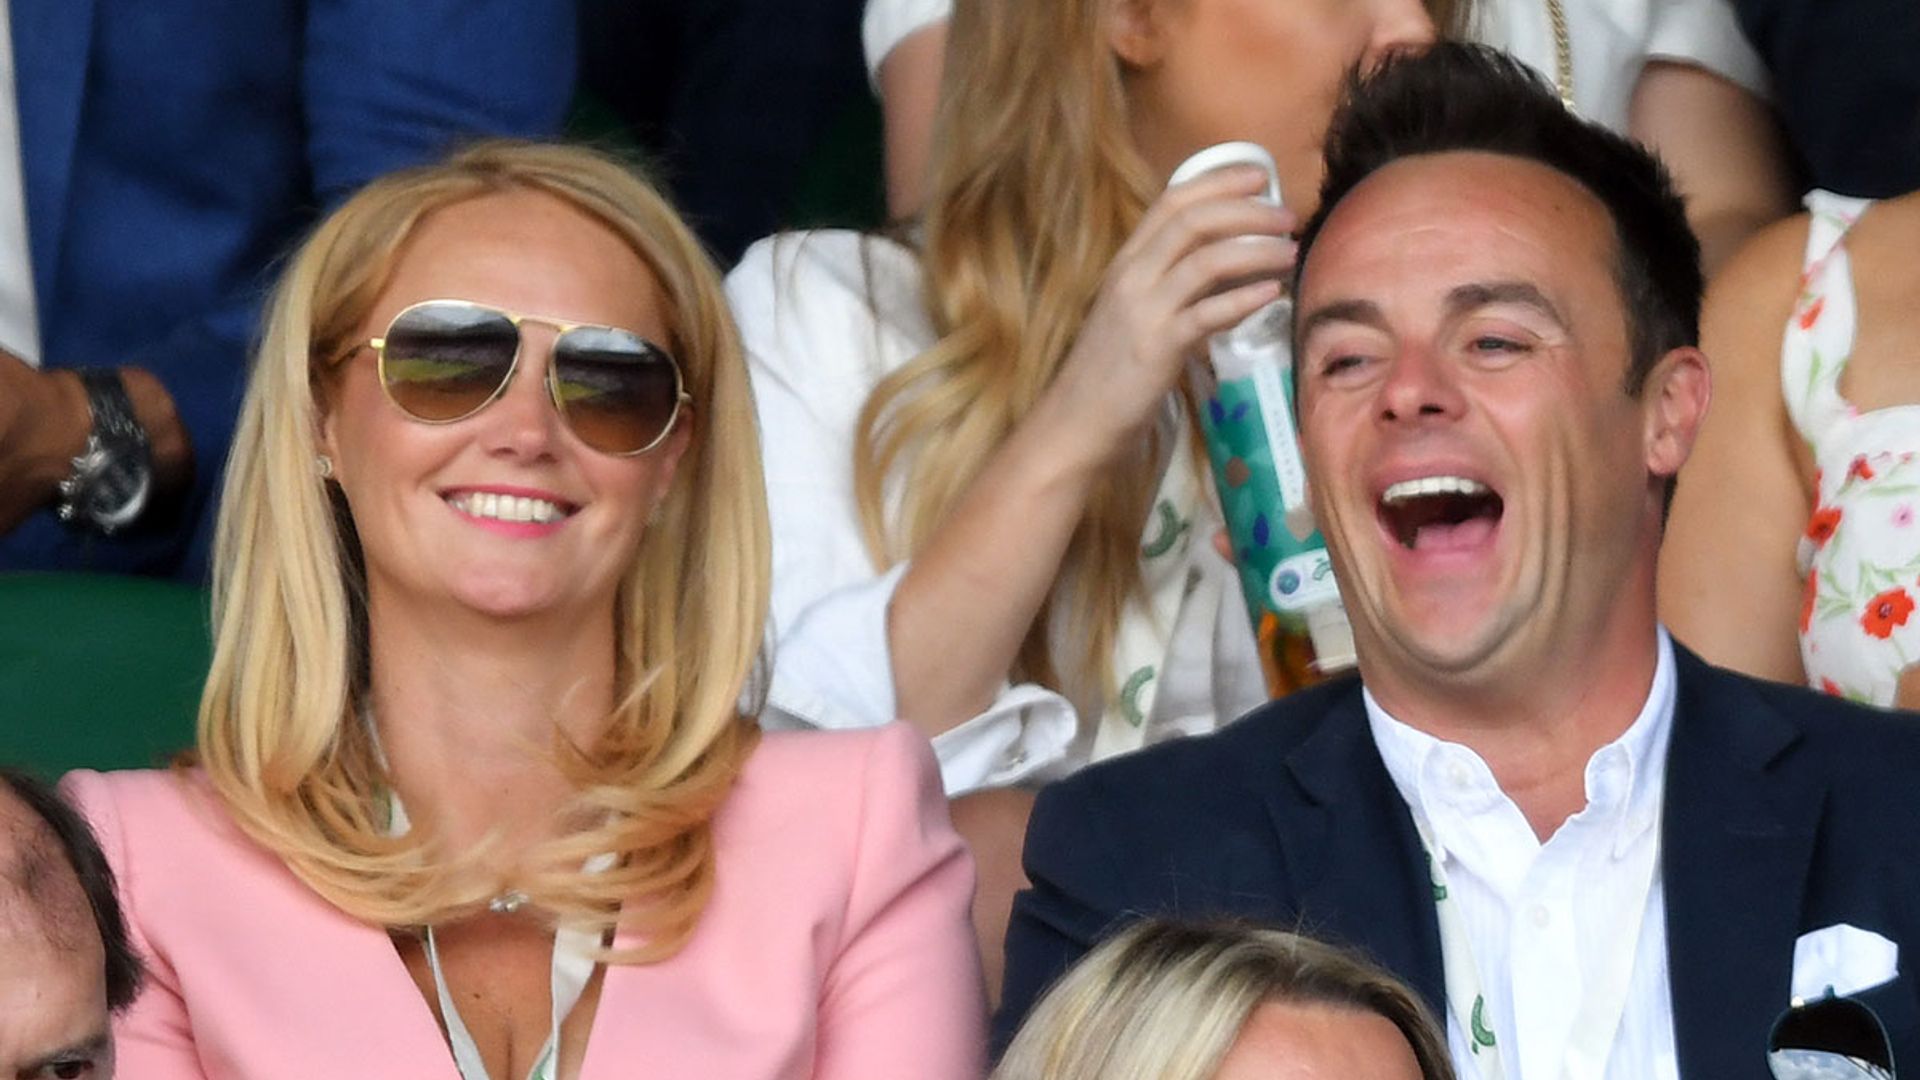 Ant McPartlin and girlfriend Anne-Marie Corbett get photobombed by this TV star